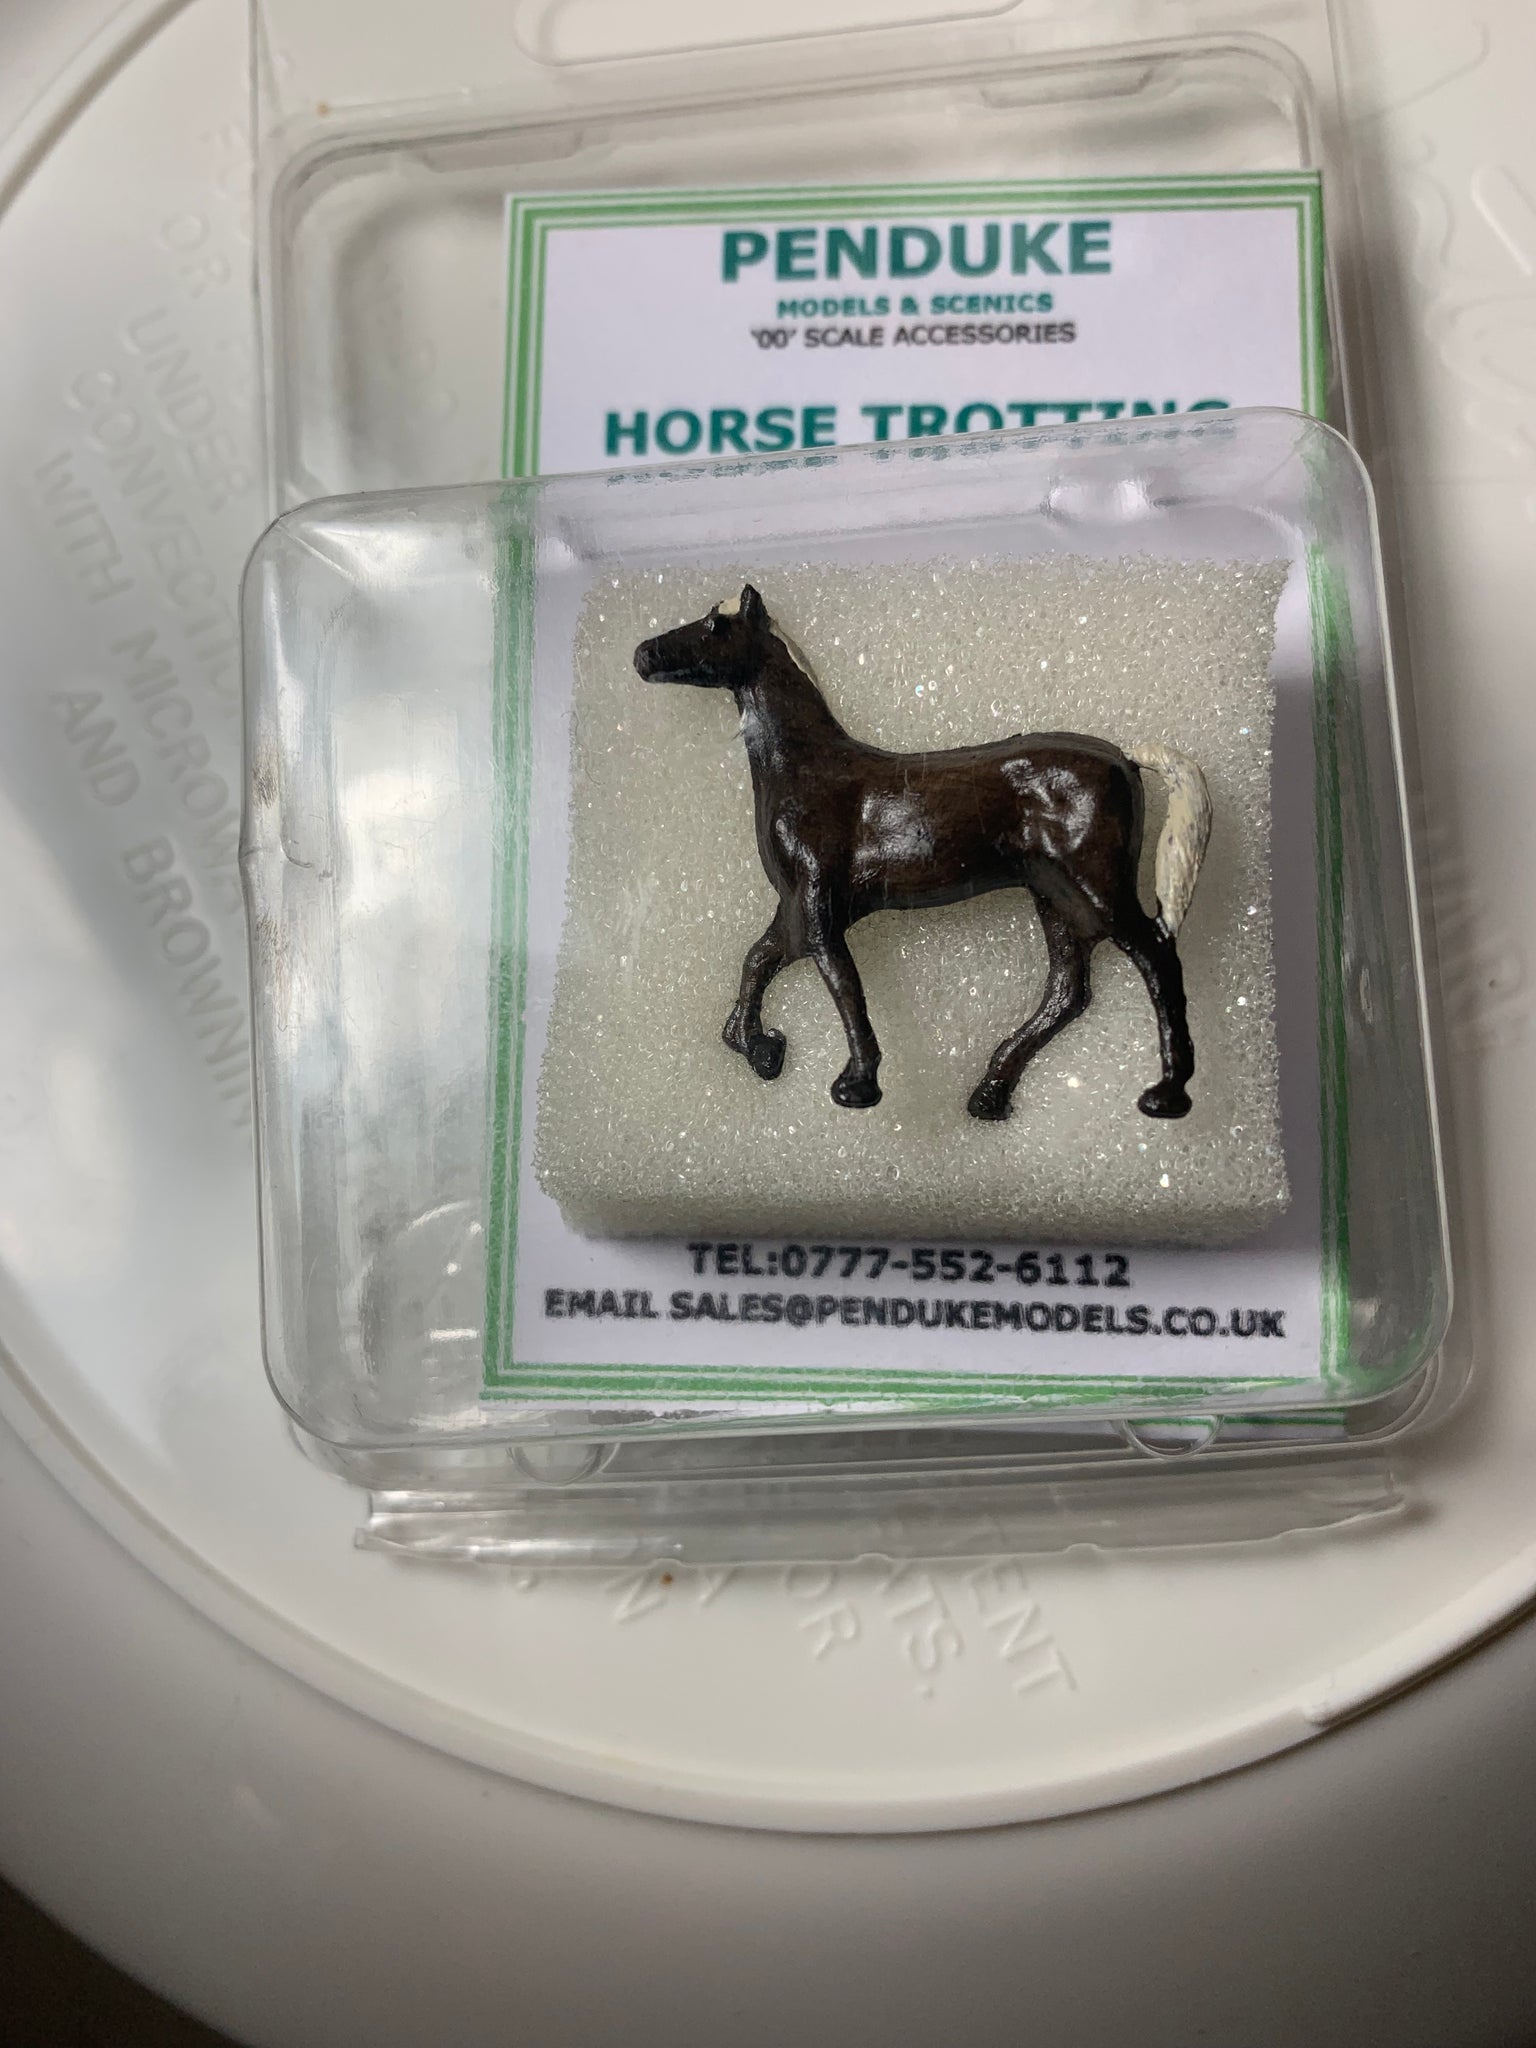 HORSE TROTTING OO SCALE